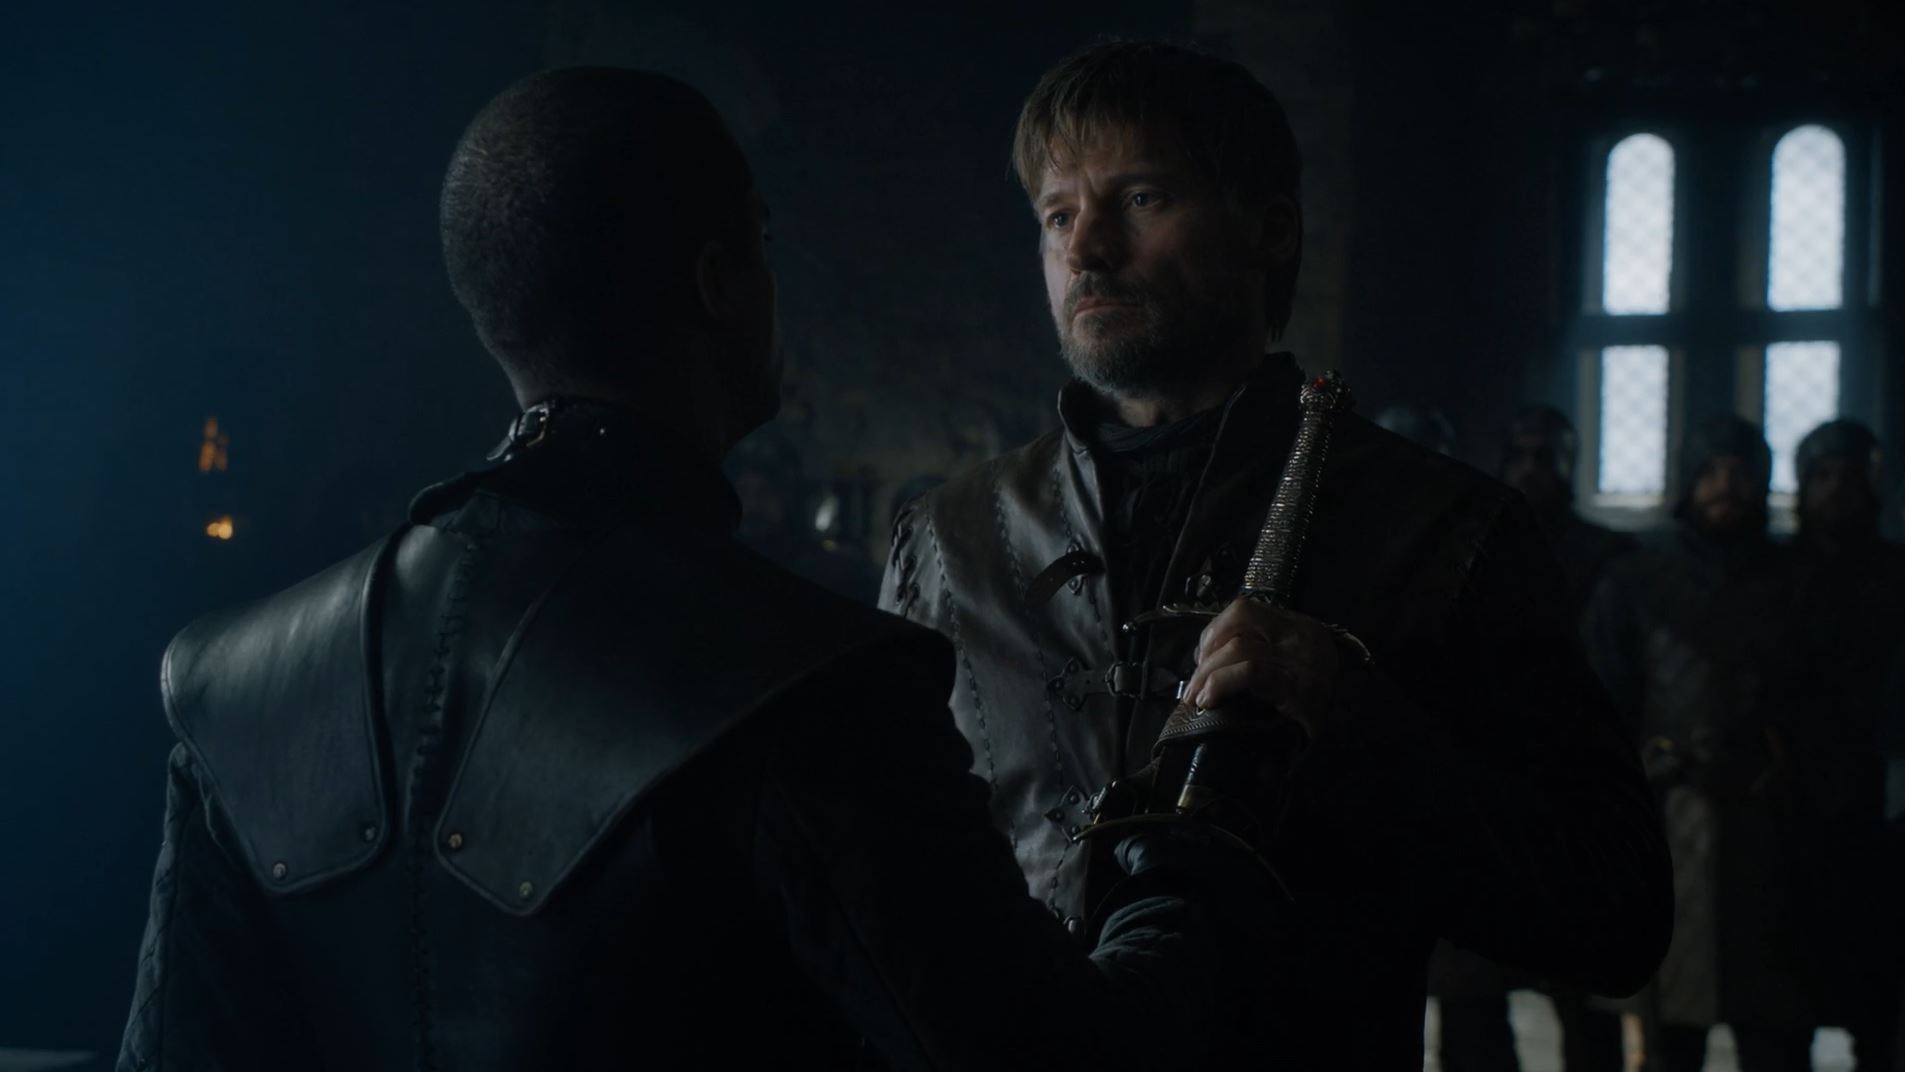 Game Of Thrones Season 8 Episode 2 Analysis A Knight Of The